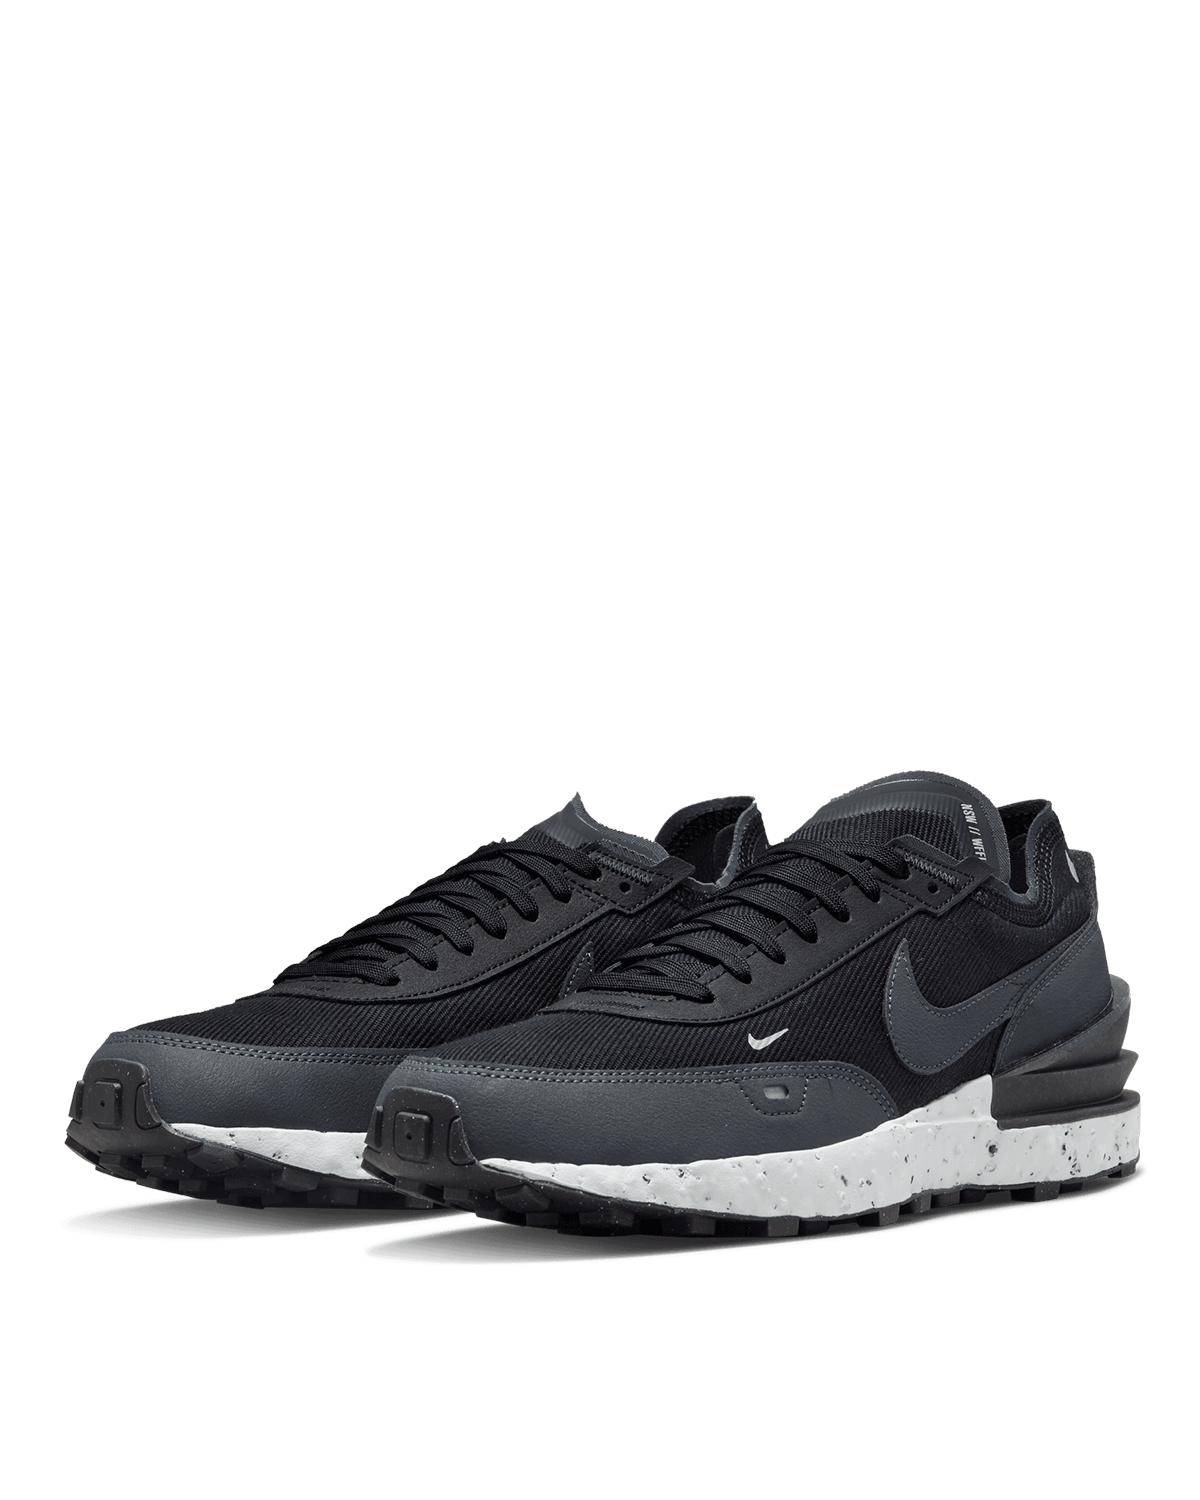 Waffle One Crater NN Black/Anthracite/Grey Fog